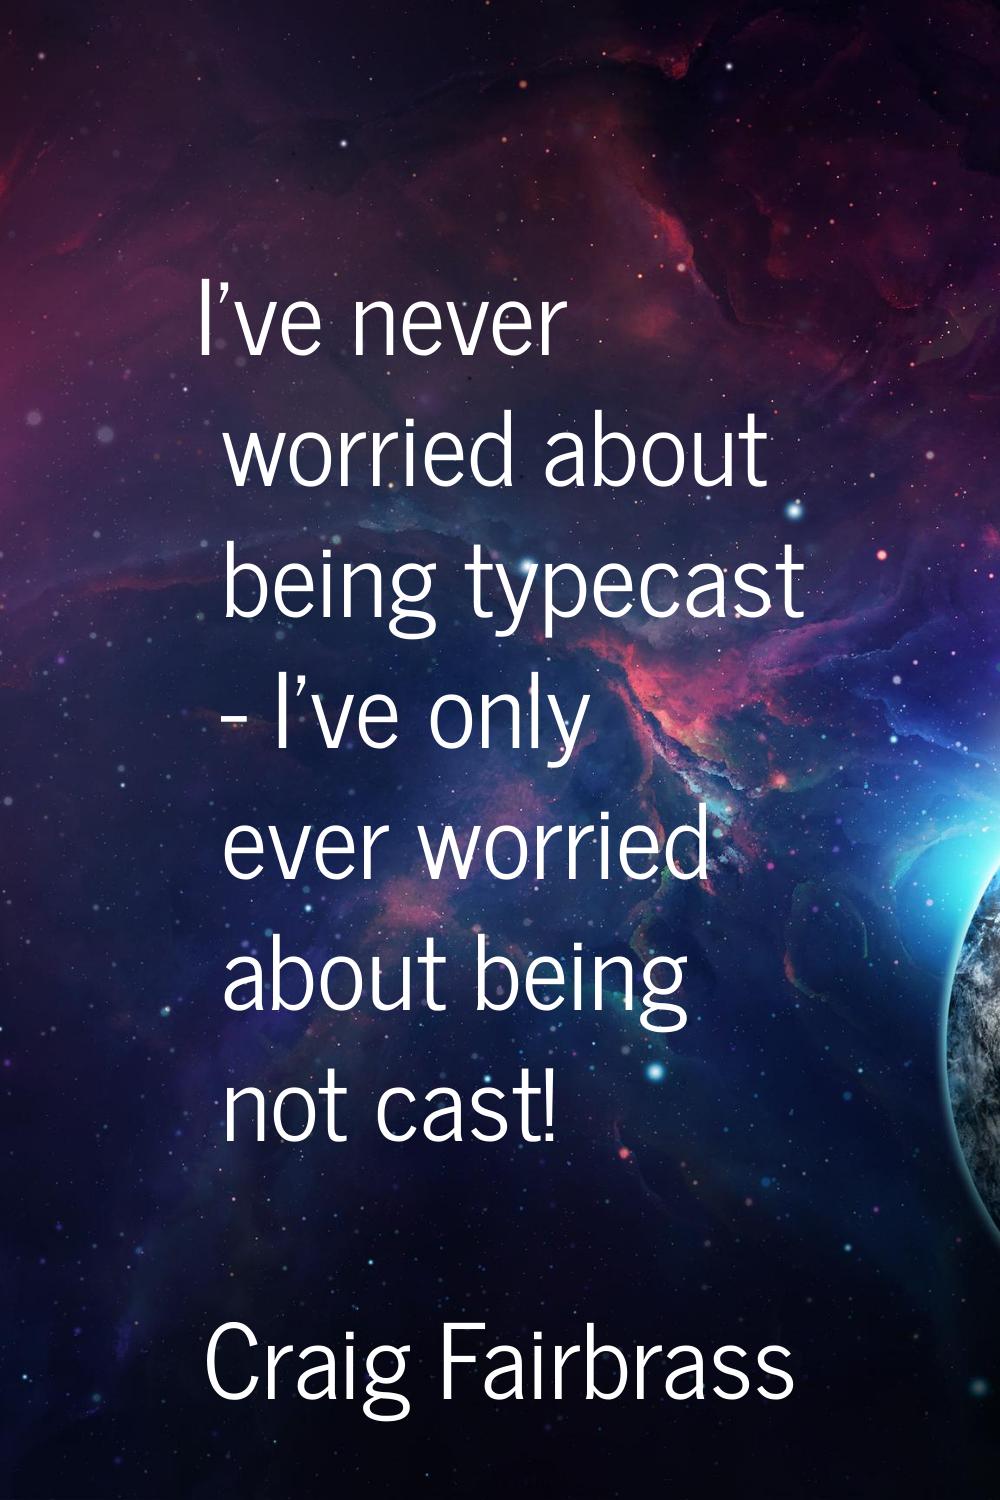 I've never worried about being typecast - I've only ever worried about being not cast!